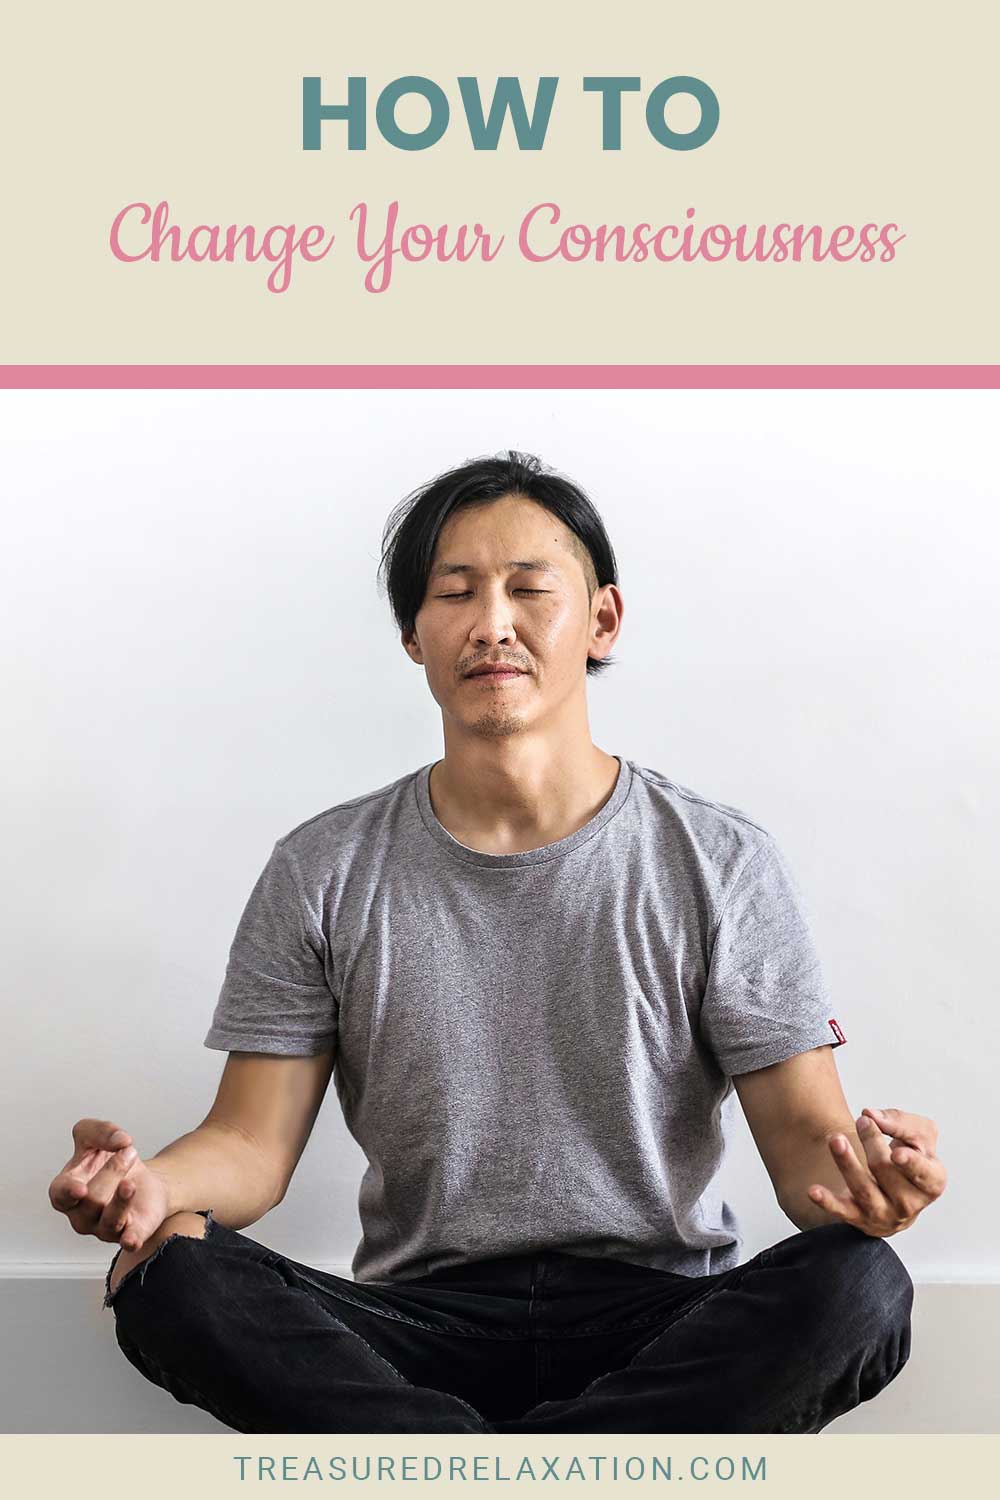 How To Change Your Consciousness